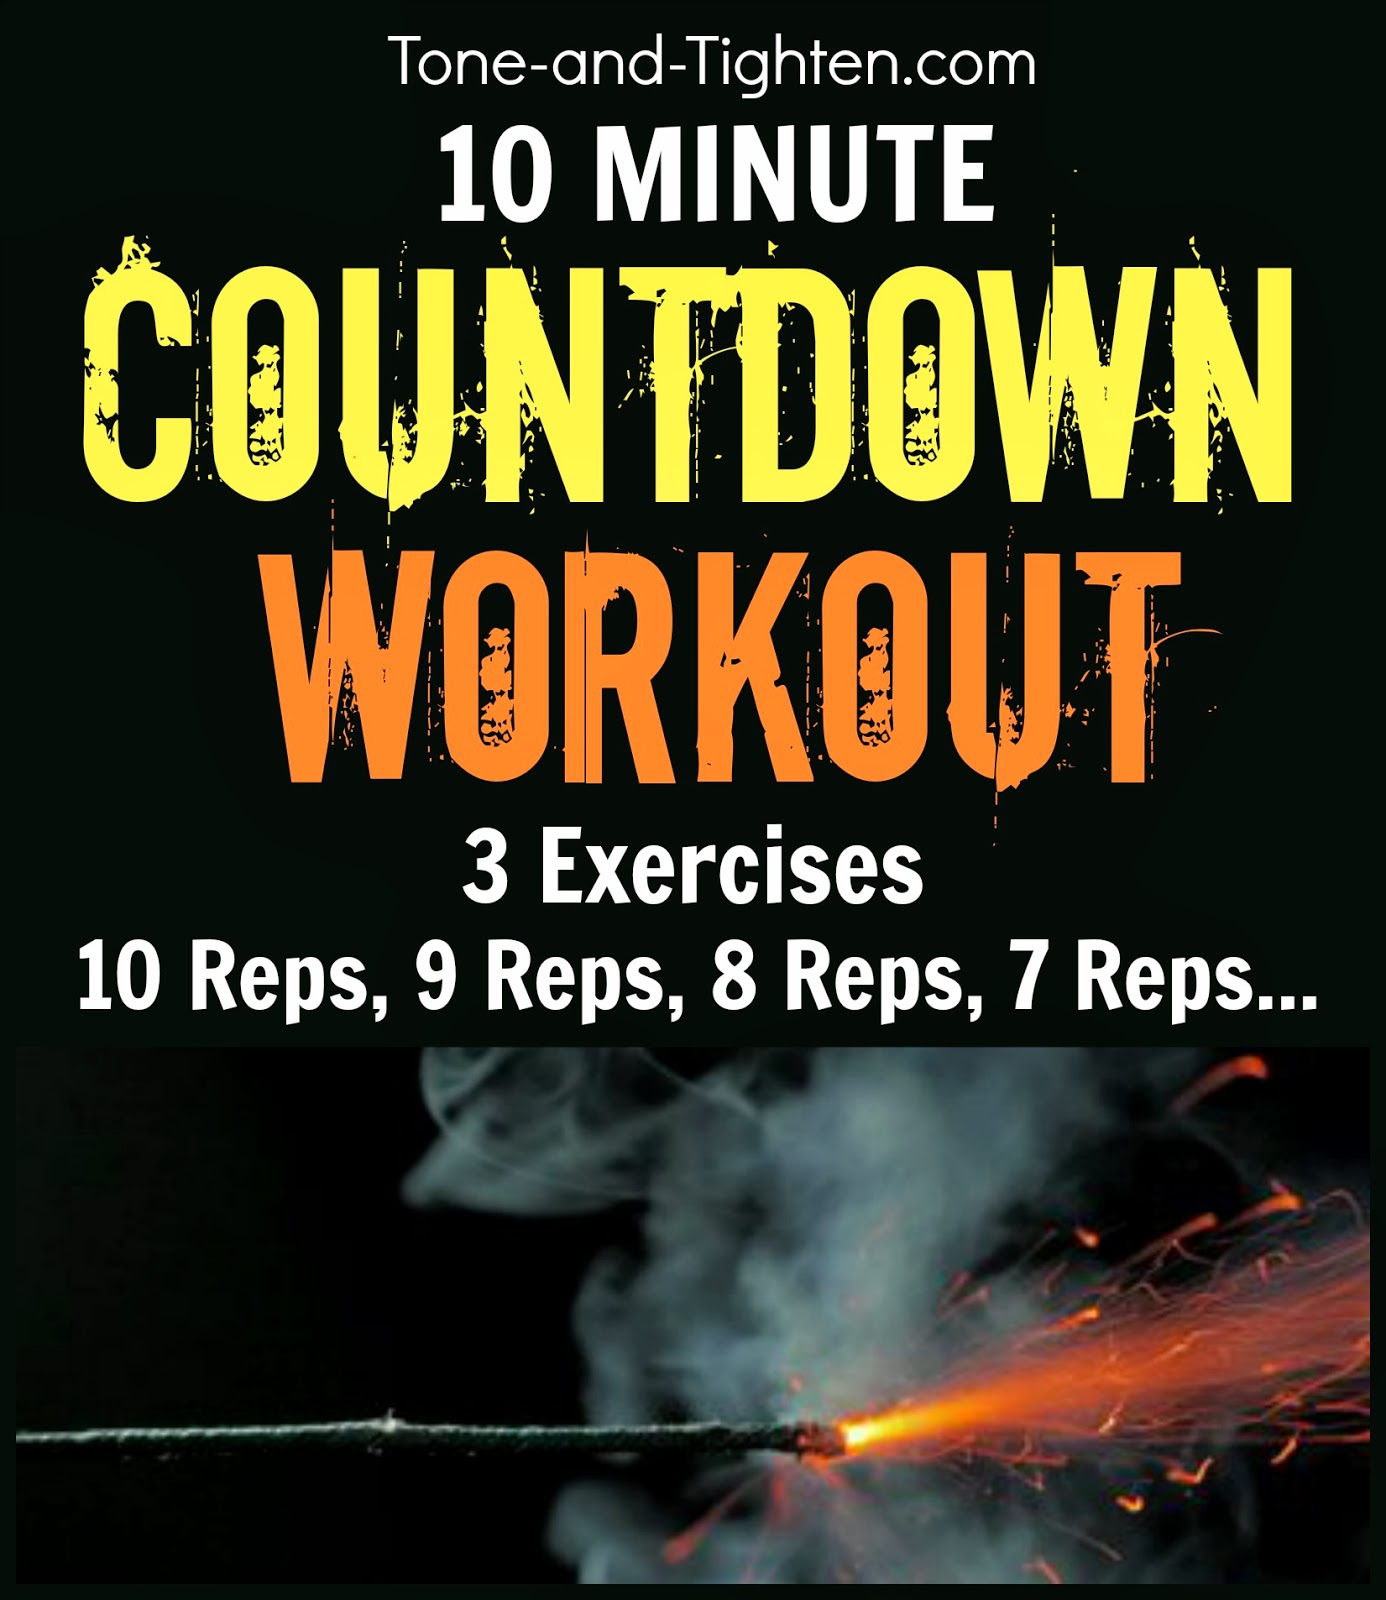 10-Minute At-Home Workout – Countdown To Fitness!